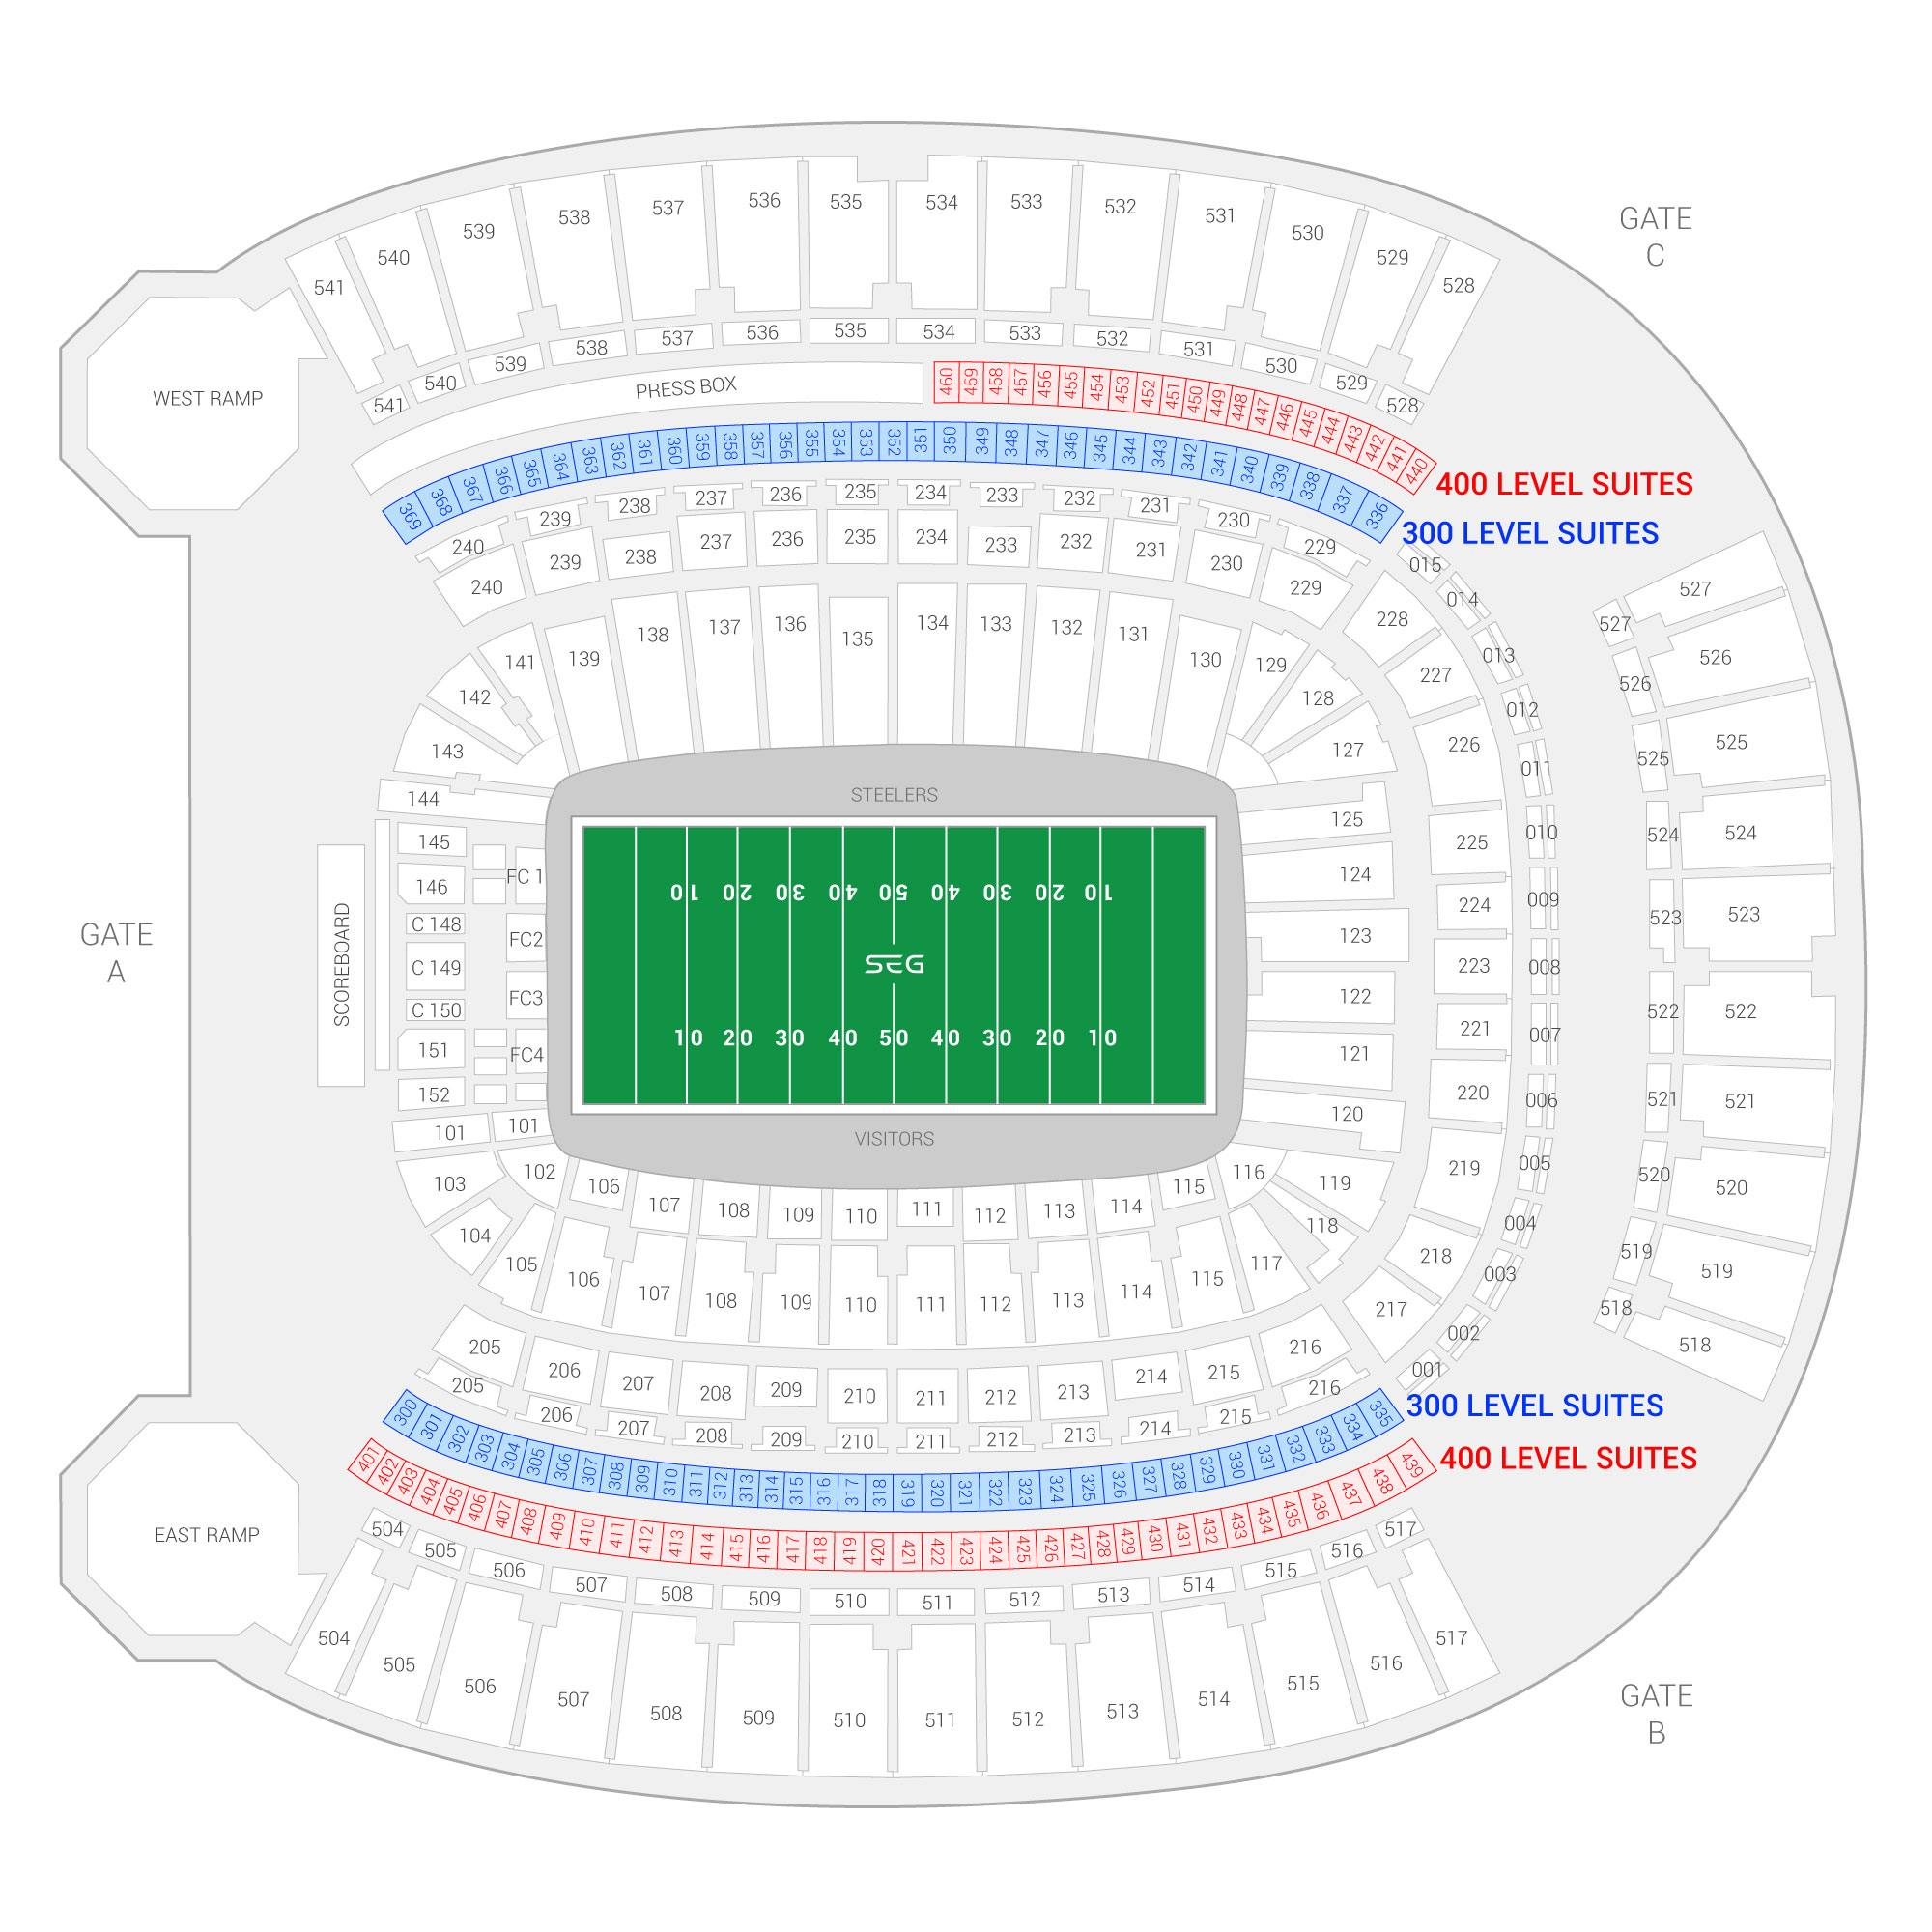 Acrisure Stadium (Formerly Heinz Field) / Pittsburgh Steelers Suite Map and Seating Chart